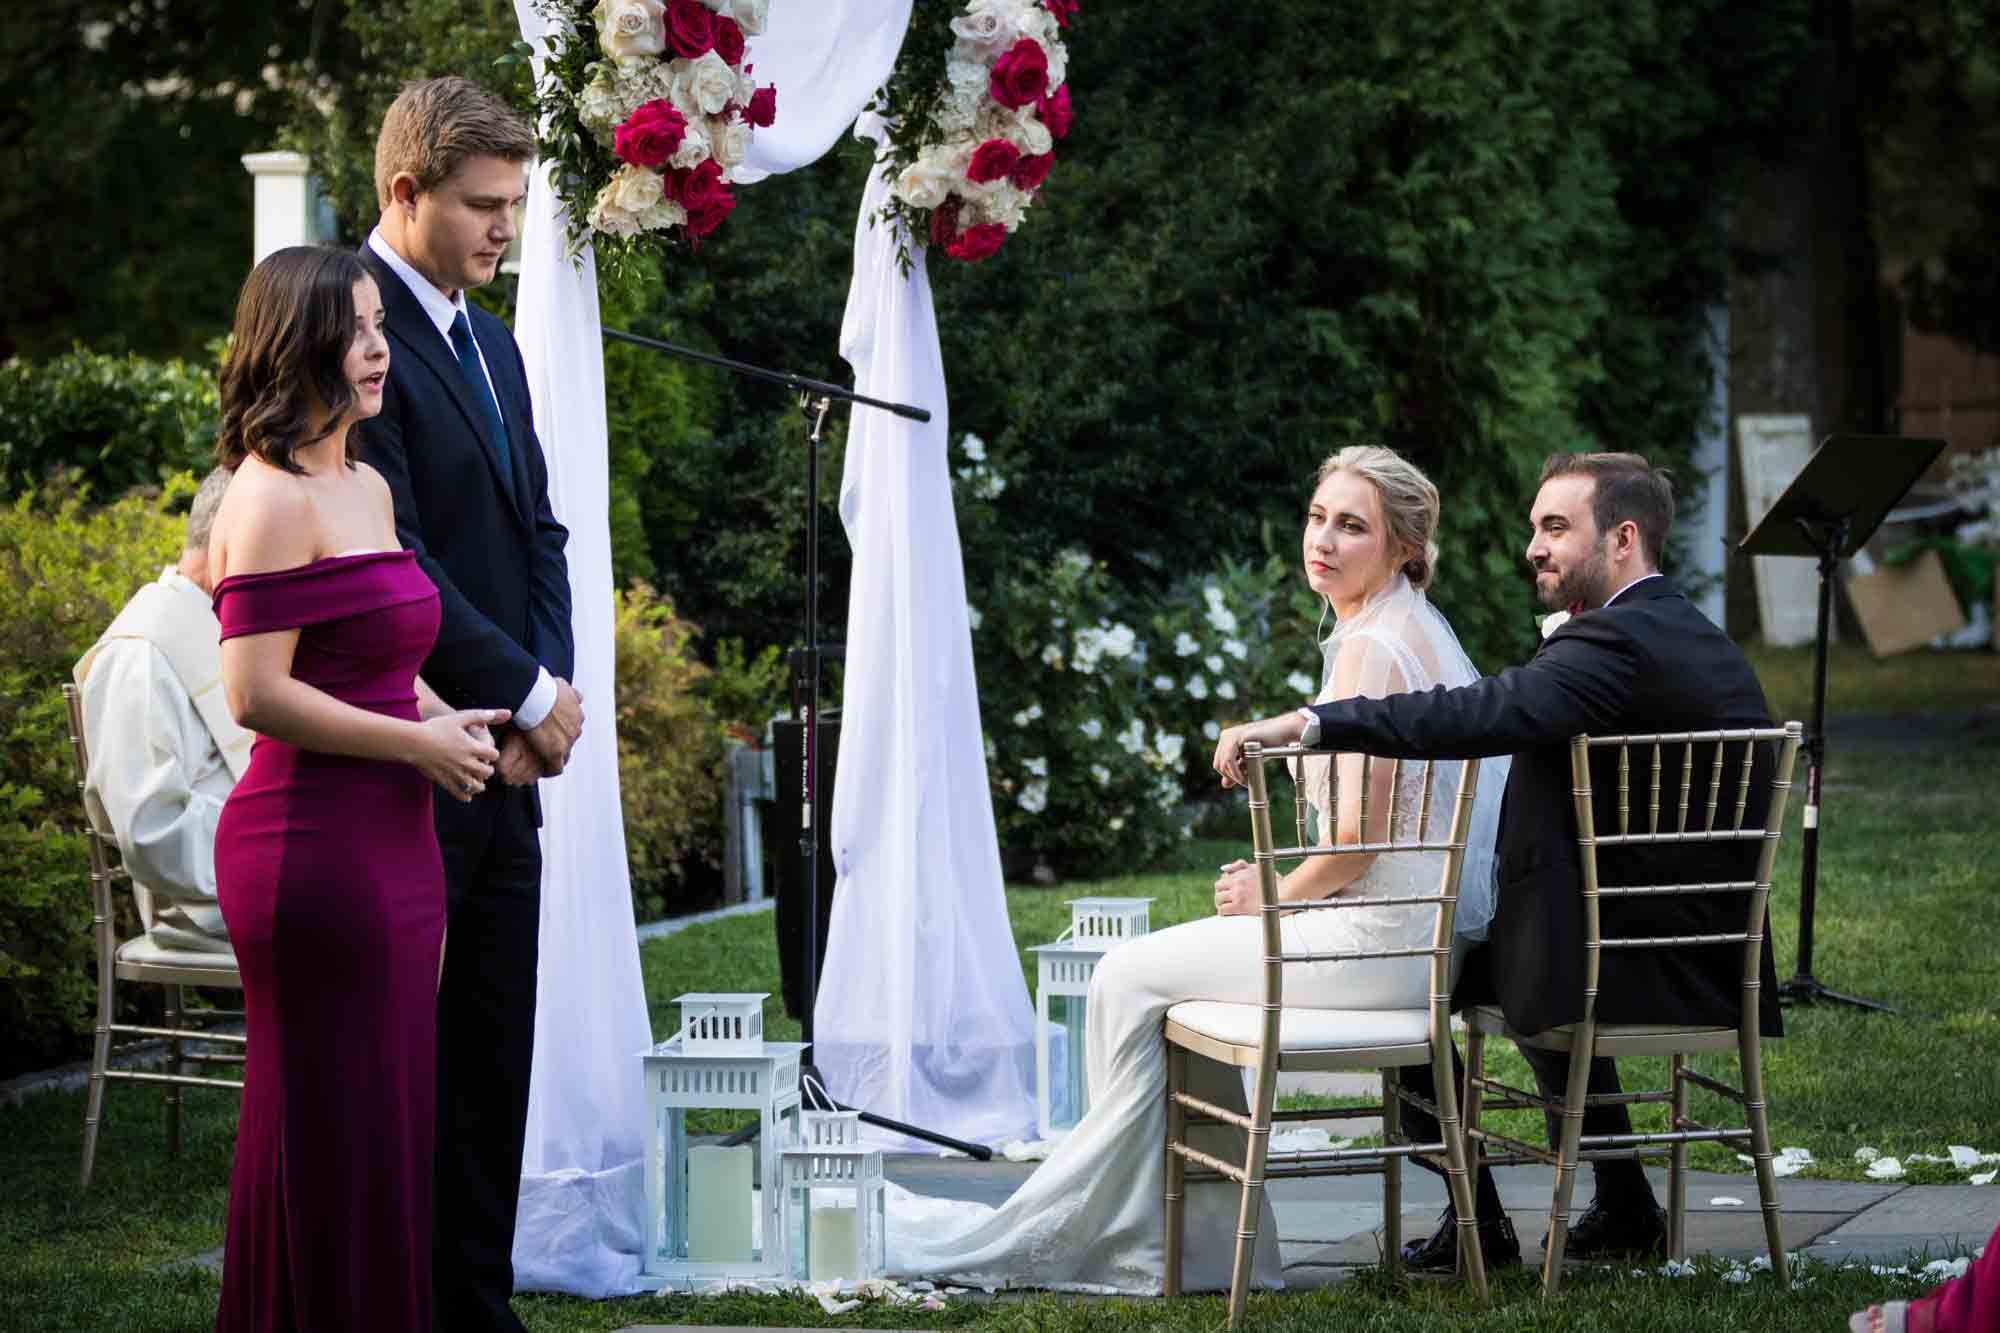 Seated bride and groom watching couple sing during outdoor ceremony at a Briarcliff Manor wedding